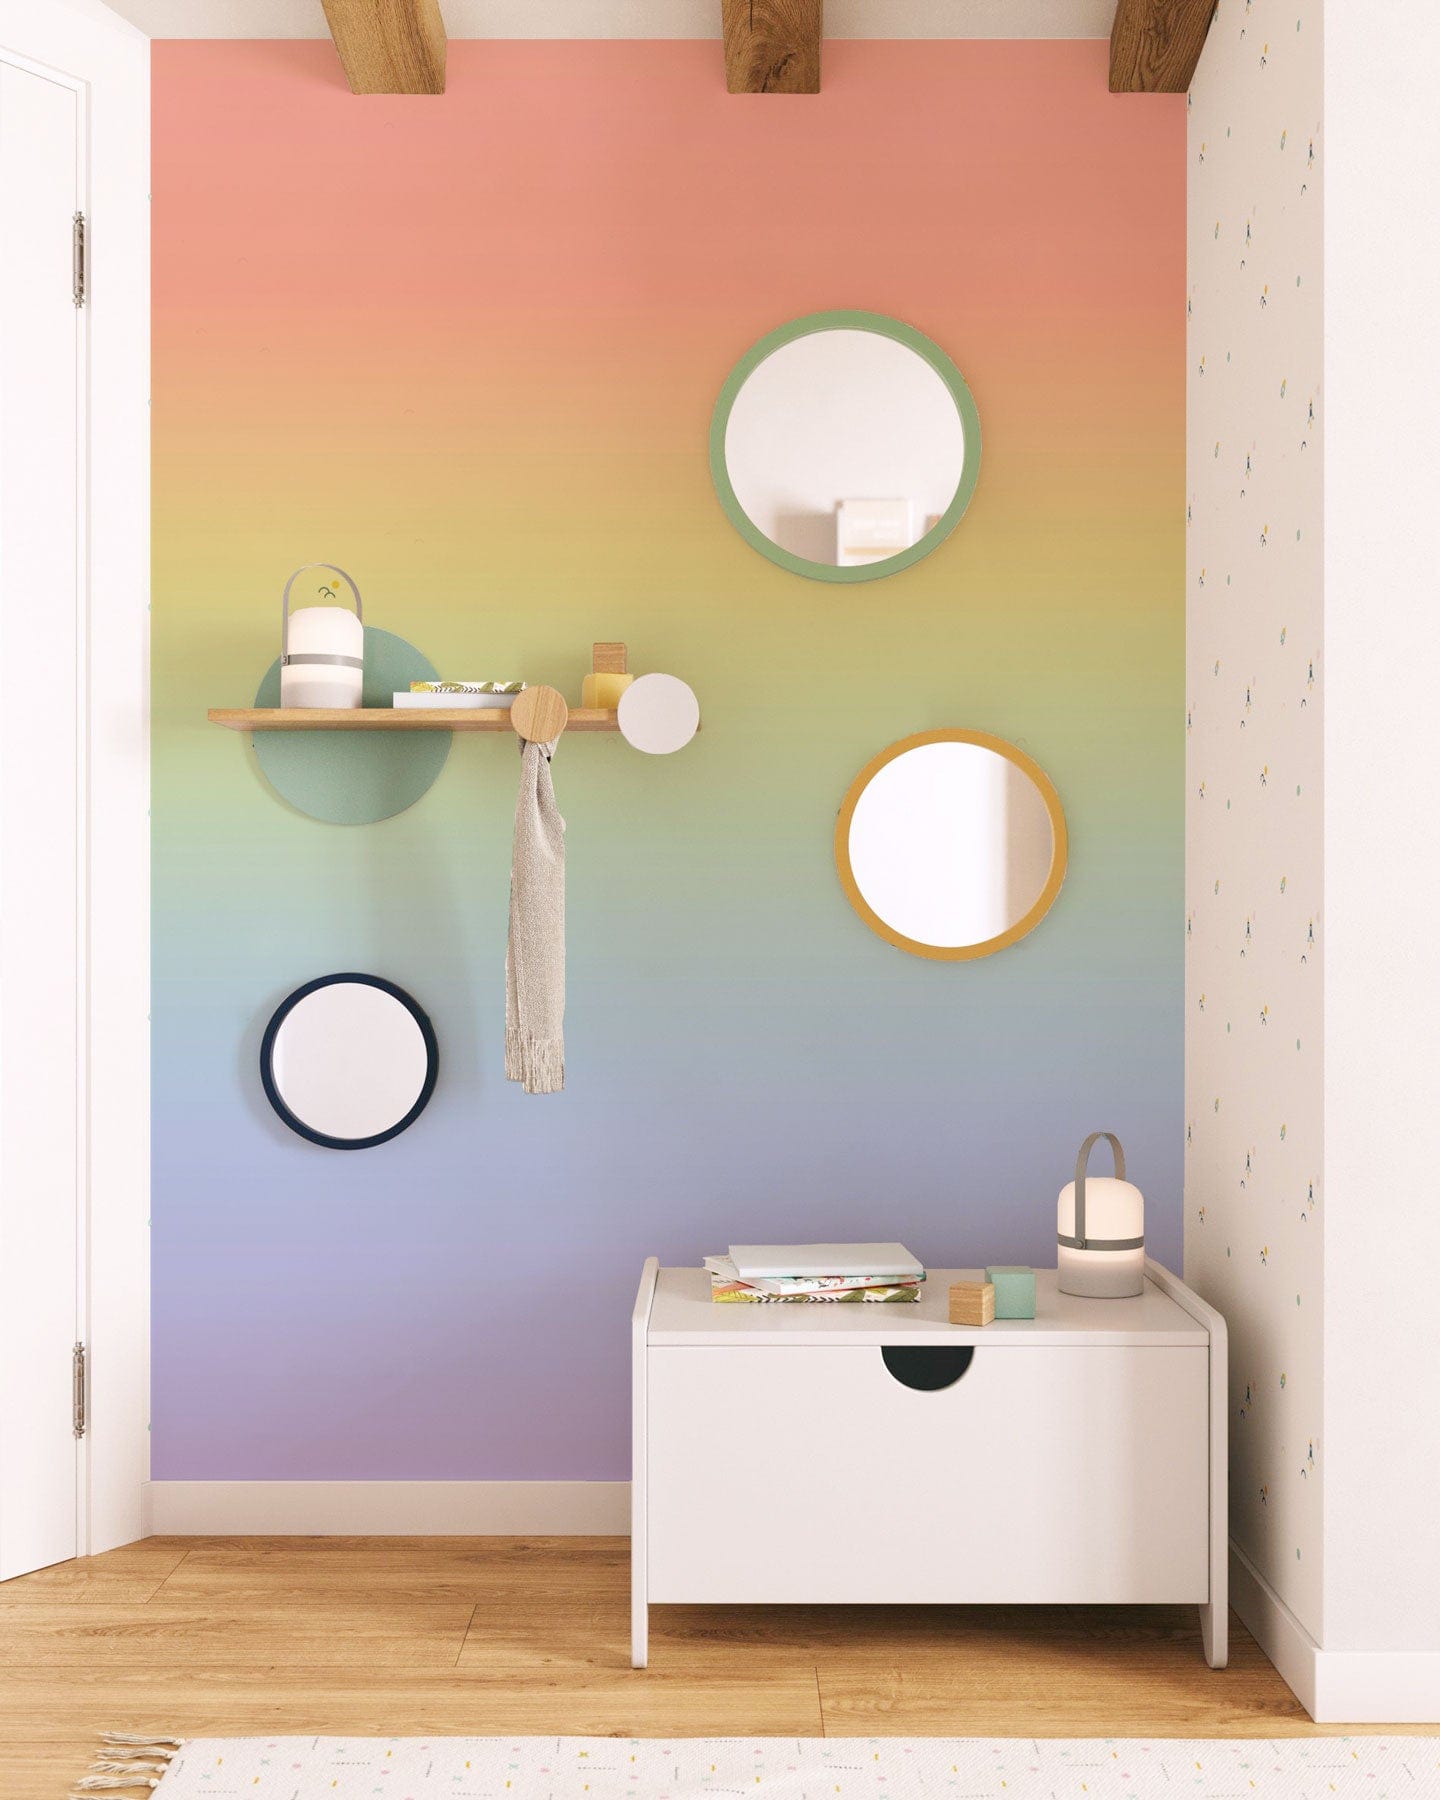 Wallpaper mural featuring an ombre cream rainbow design for the hallway's decor.